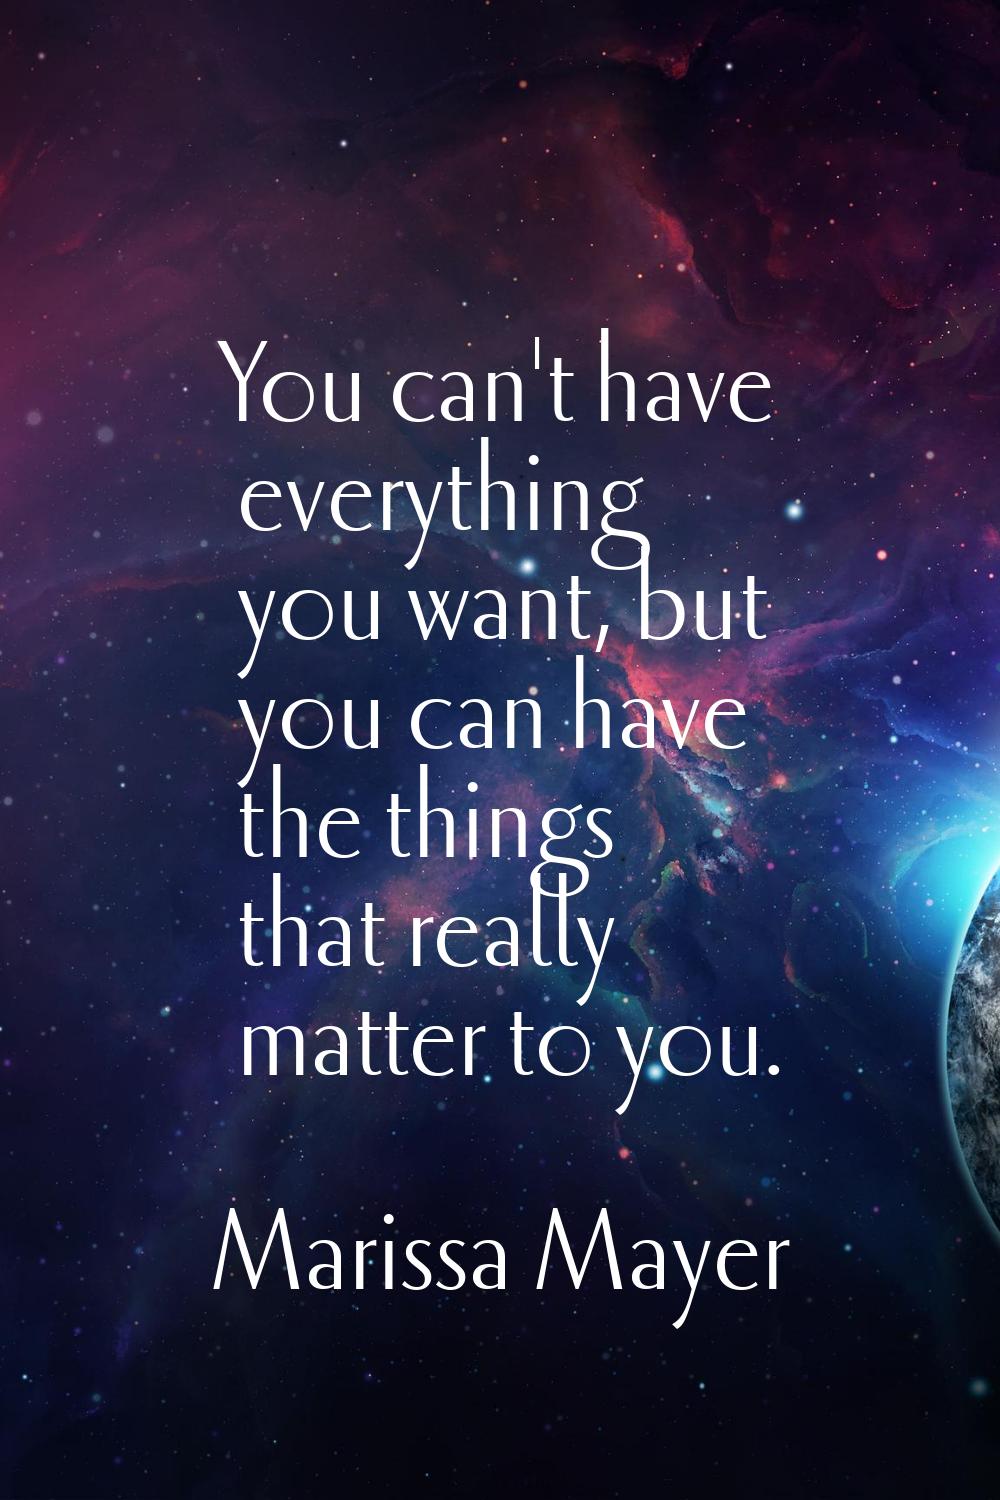 You can't have everything you want, but you can have the things that really matter to you.